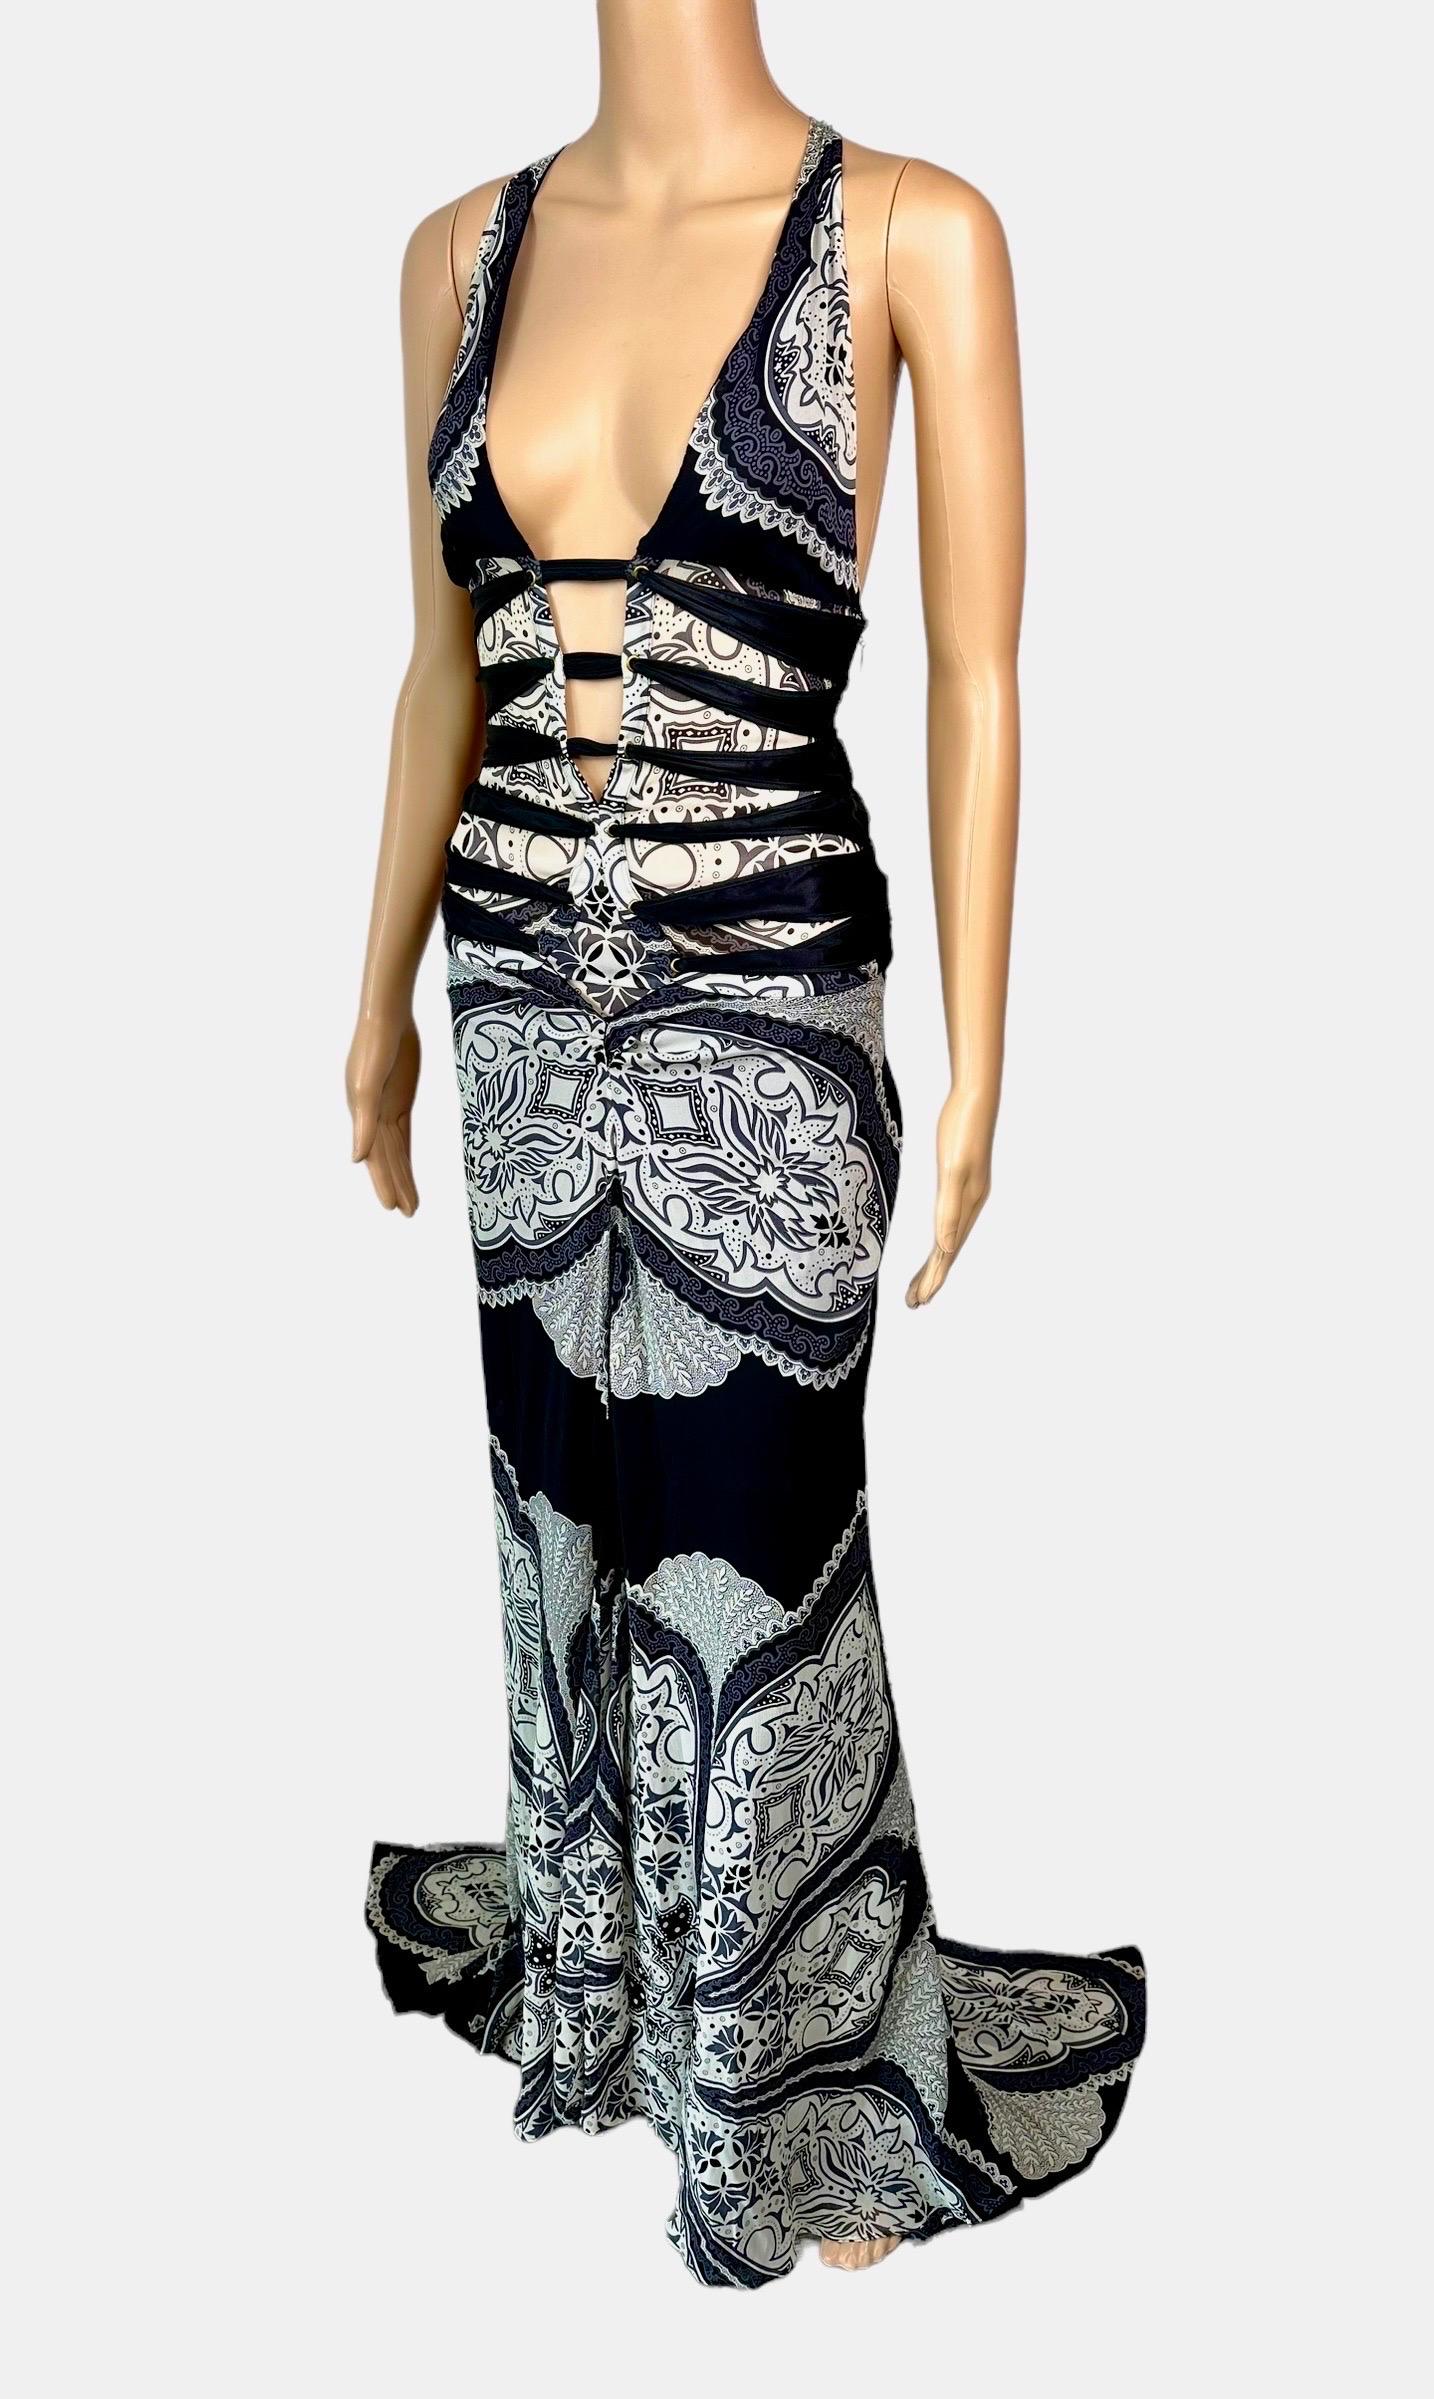 Tom Ford for Gucci Cruise 2004 Plunging Cutout Strappy Silk Evening Dress Gown For Sale 6